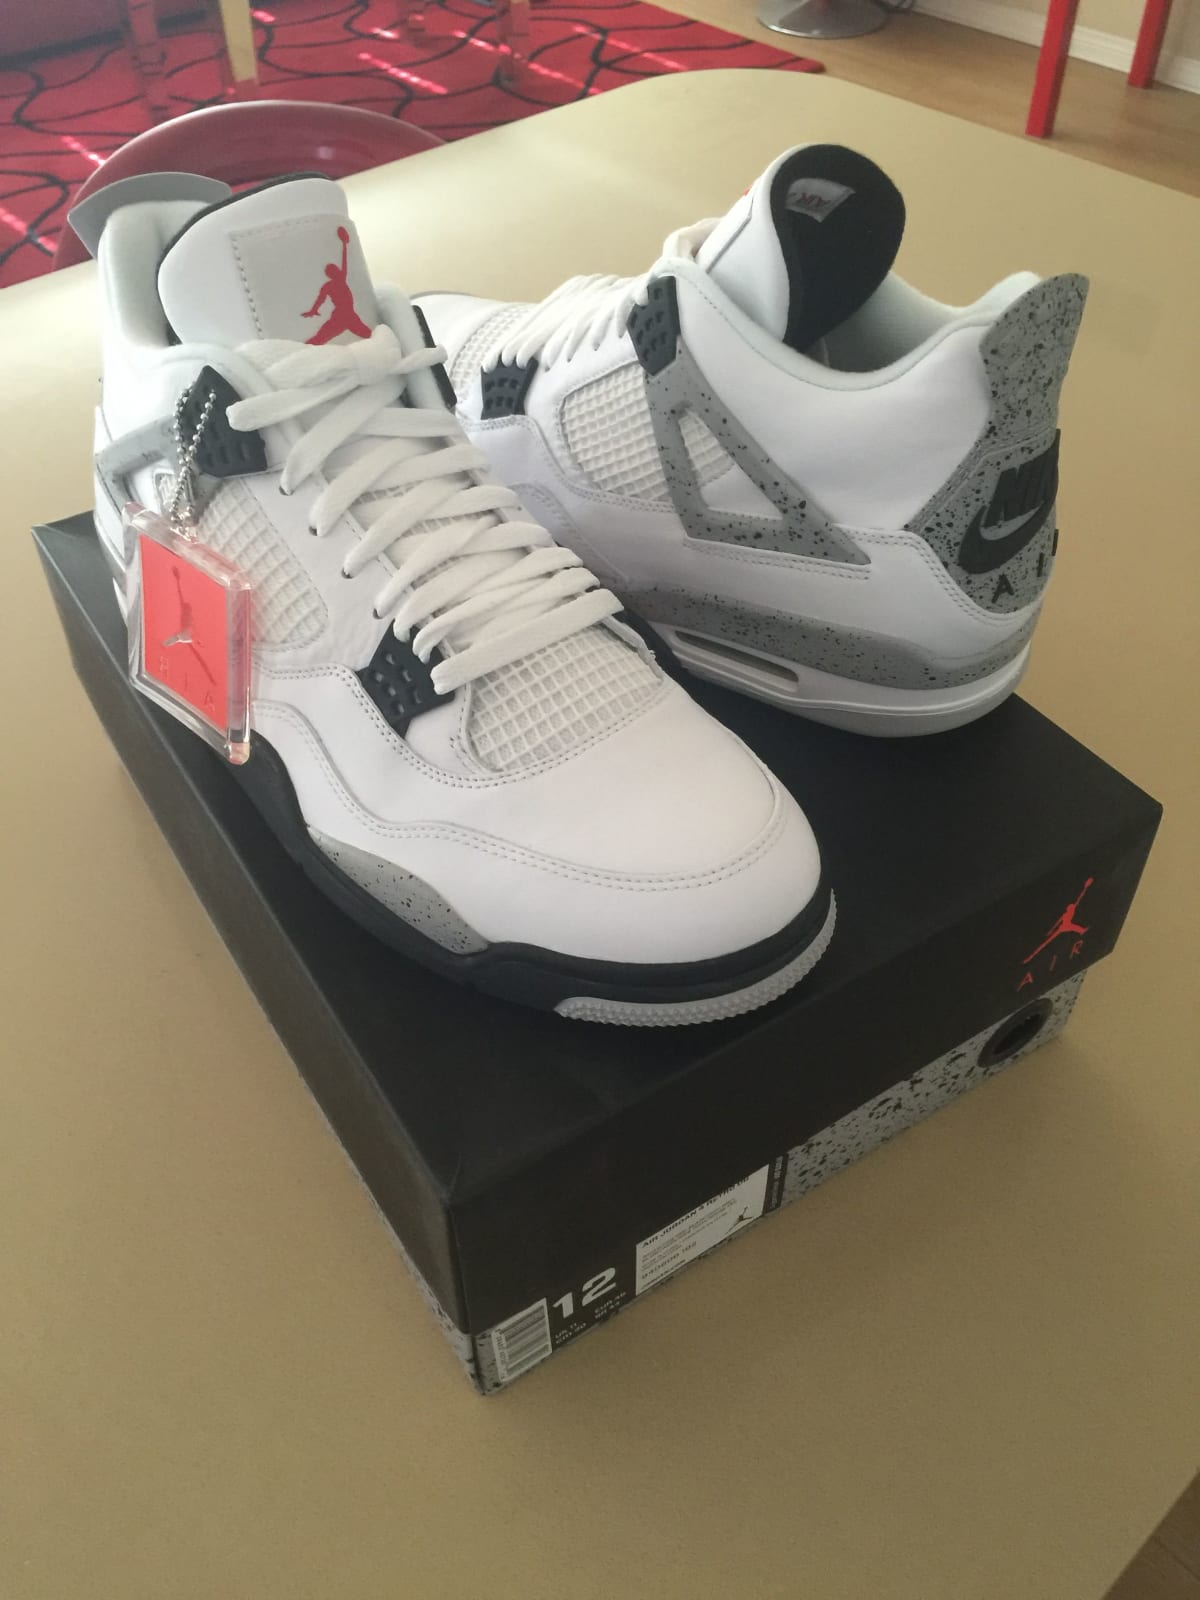 Air Jordan 4 Retro White Cement (2016) - Pickups of the Week | Sole Collector